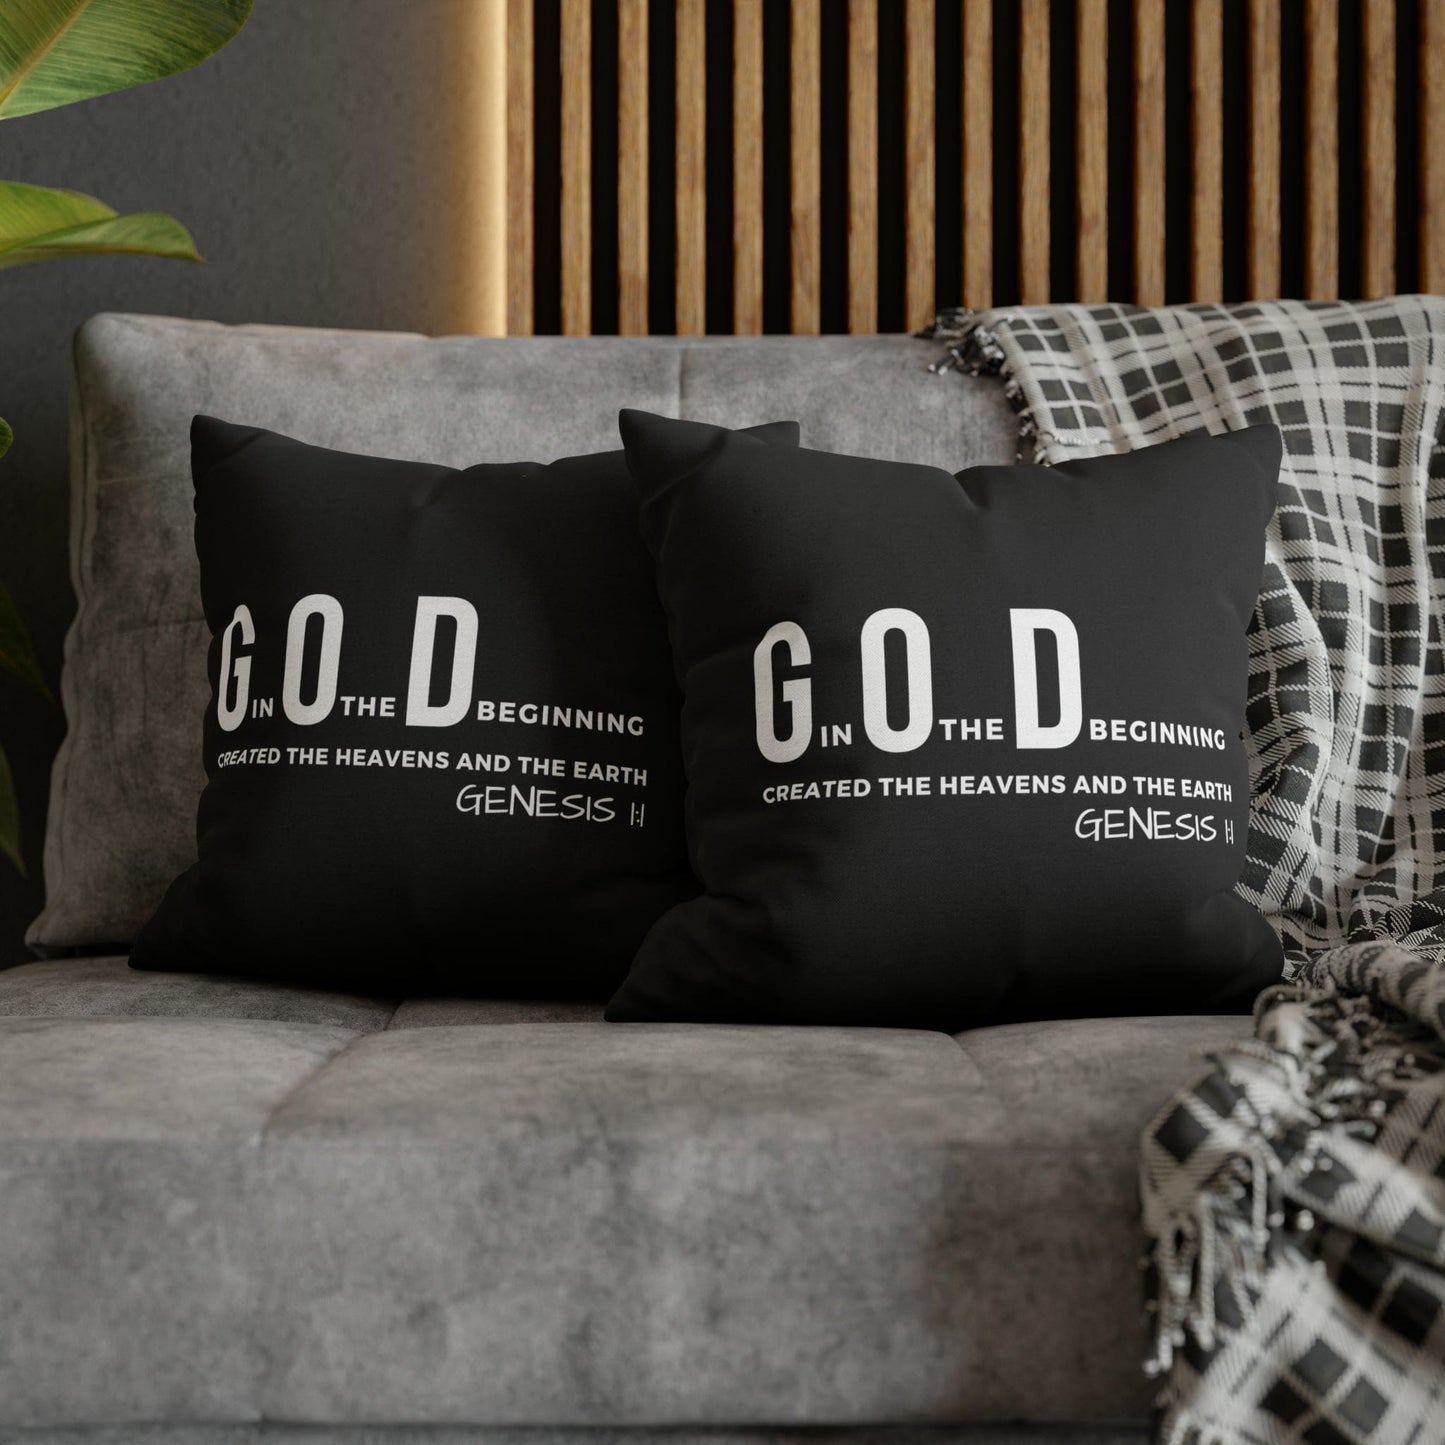 Decorative Throw Pillow Cover - Set Of 2, God In The Beginning Created The Heavens And The Earth - Scripture Verse-21